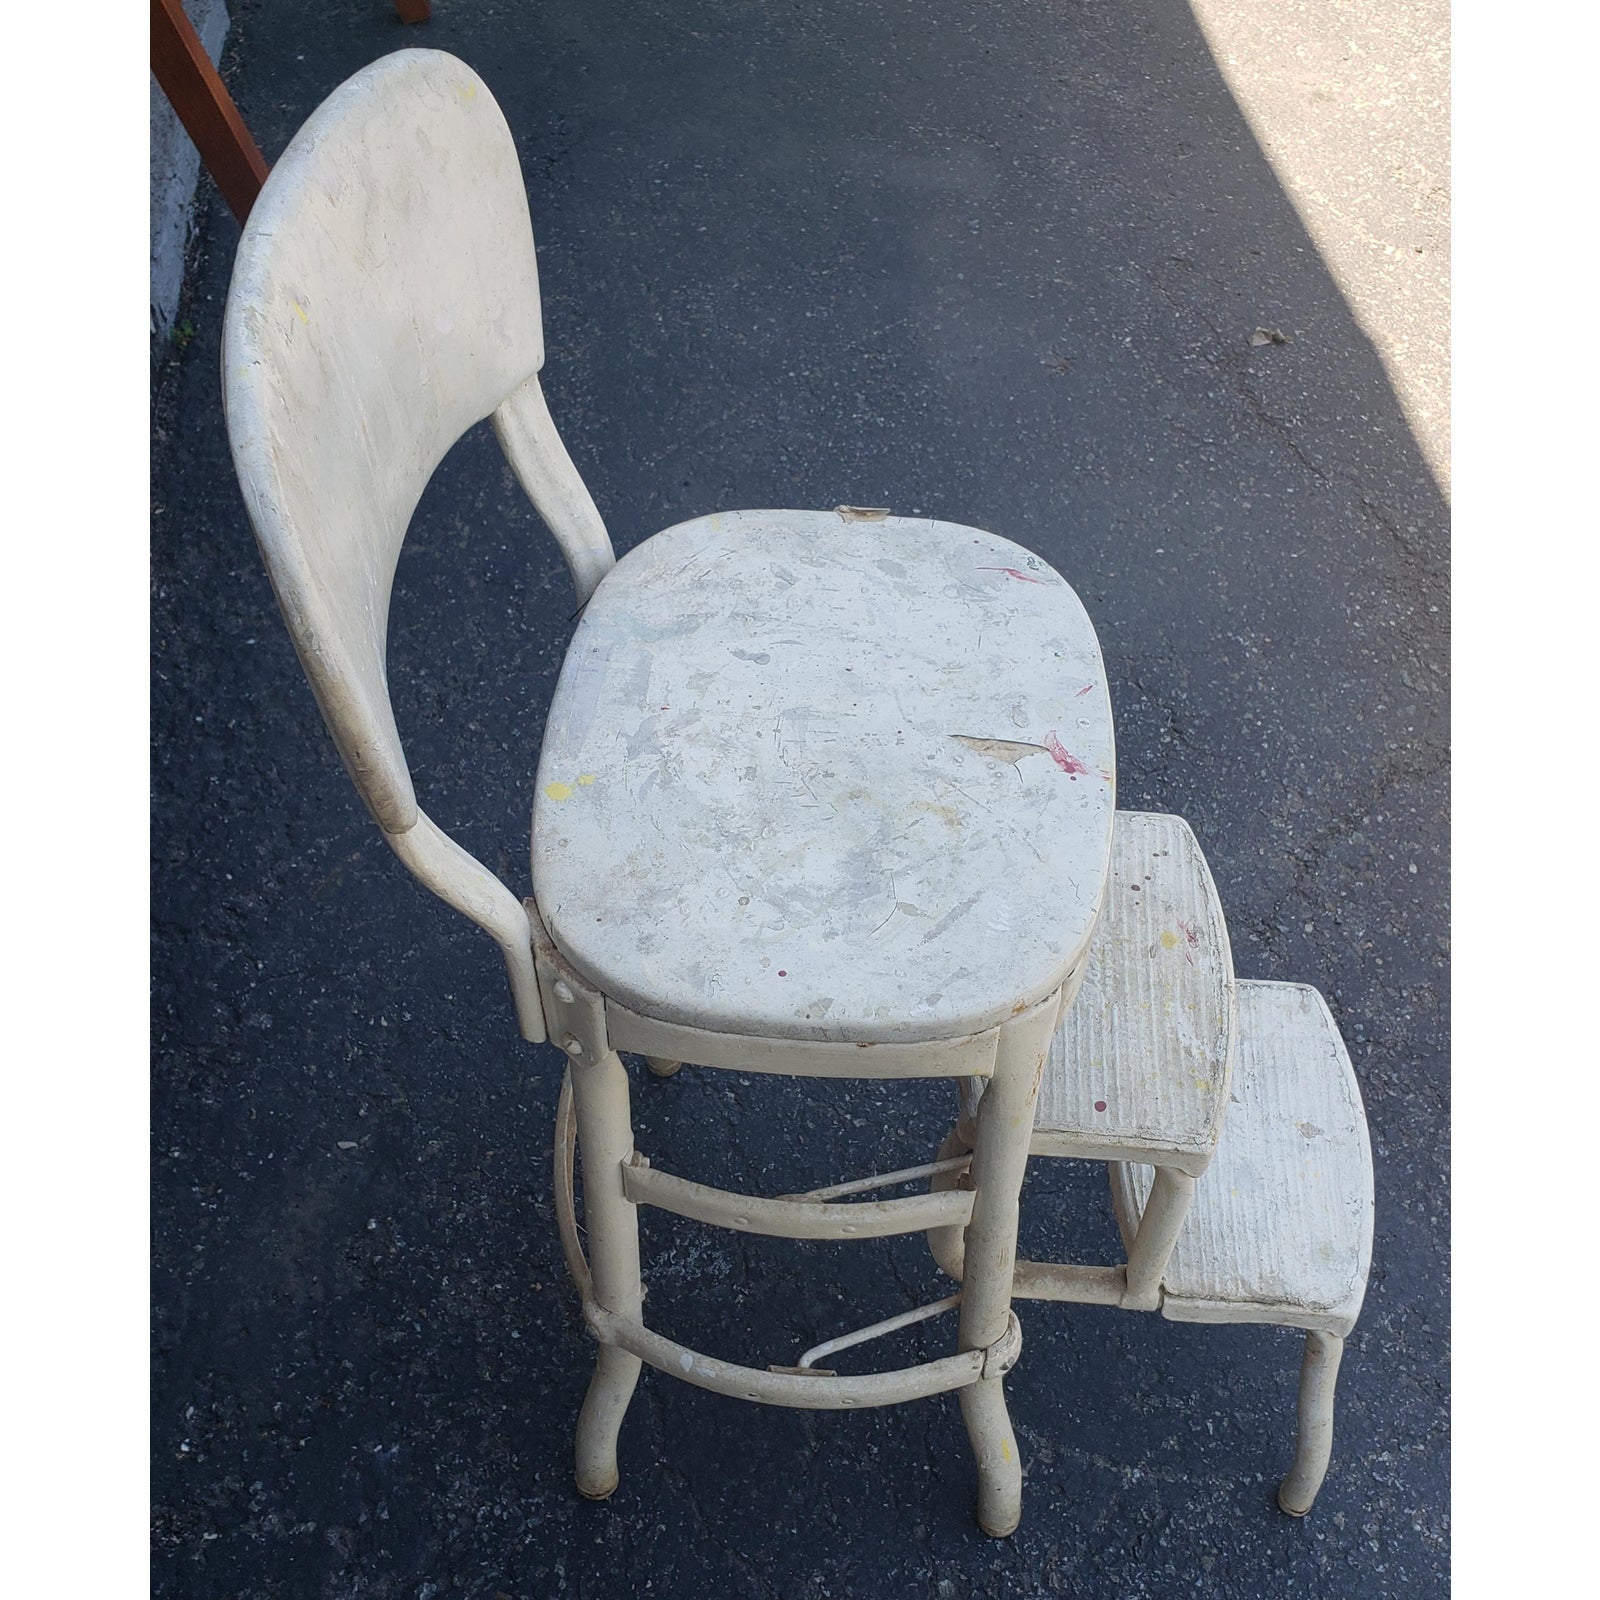 Retro Counter Chair and Step Stool